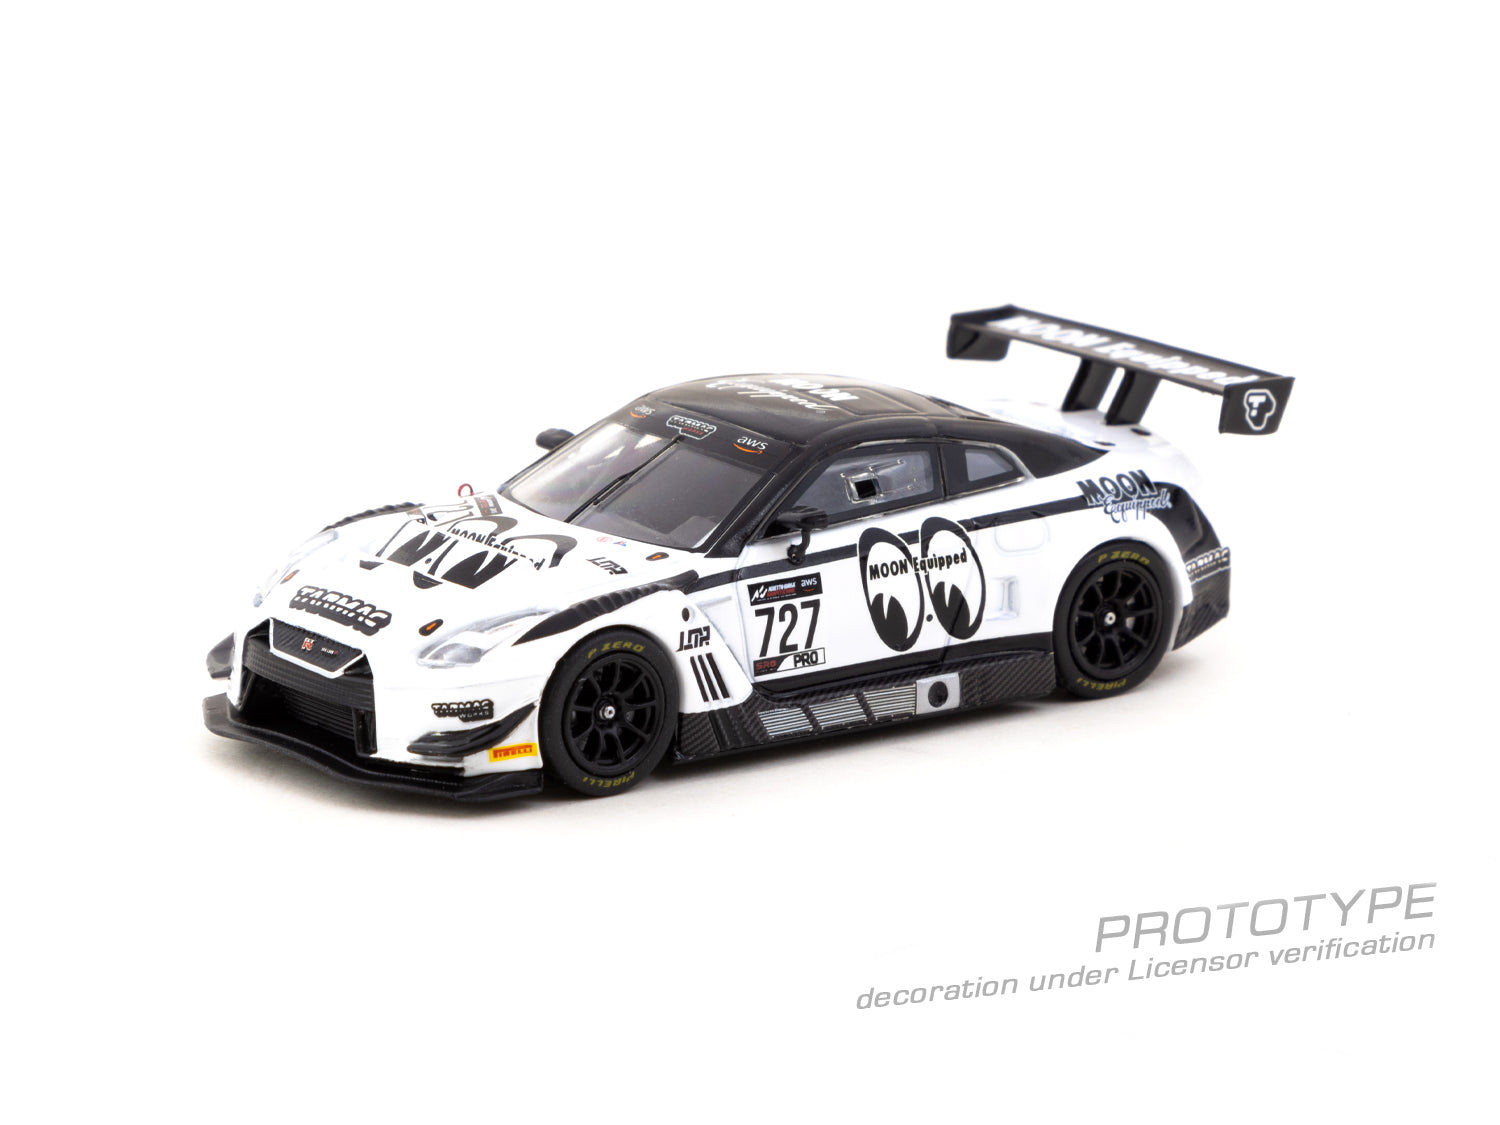 Tarmac Works 1/64 Nissan GT-R NISMO GT3 Legion of Racers 2022  Moon Equipped Tarmacworks